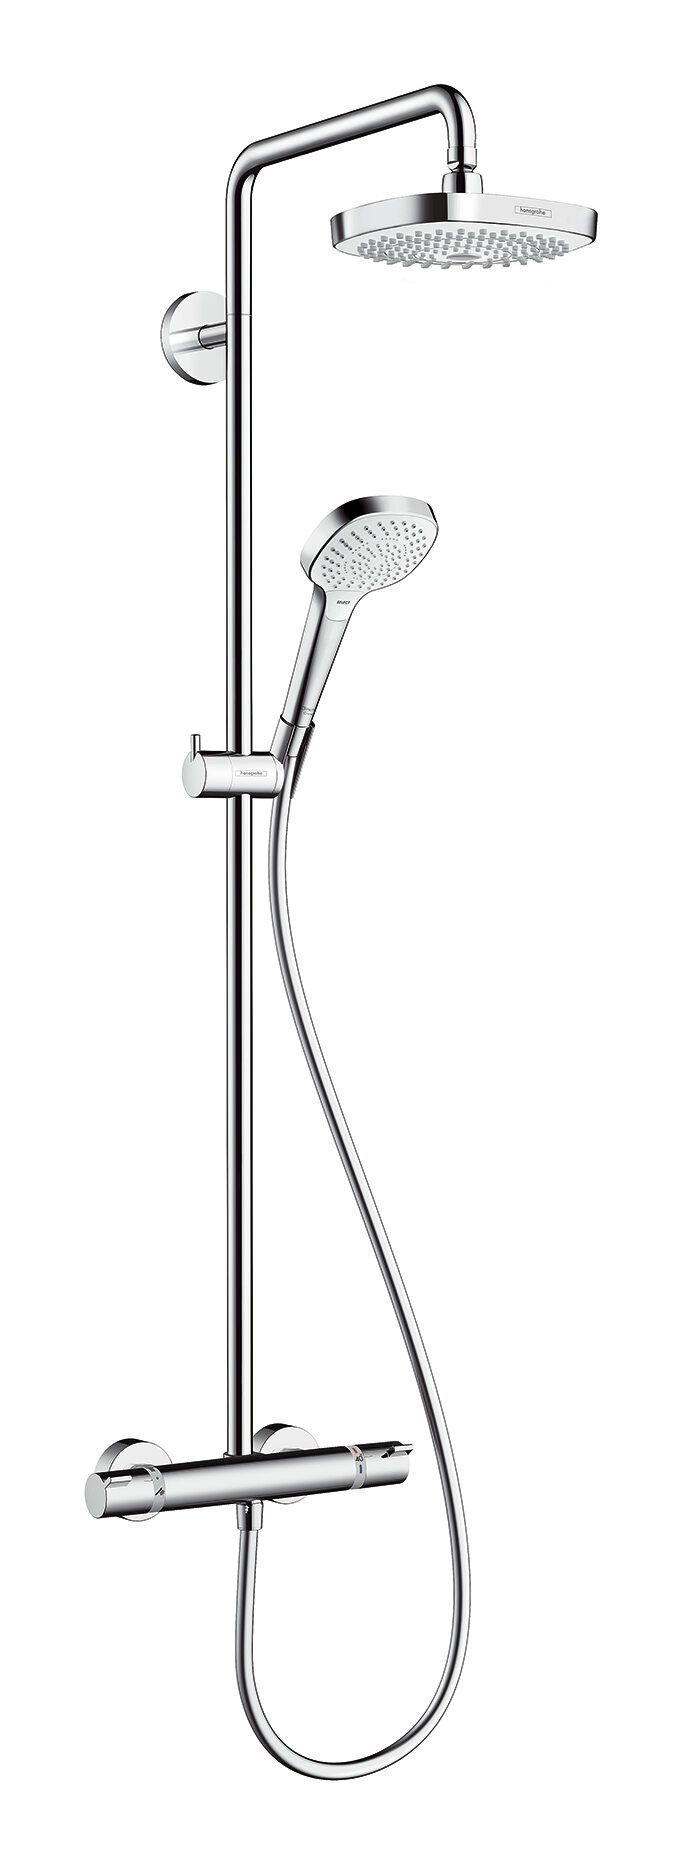 114.1 cm, / Showerpipe, Croma Thermostat 2jet Select Strahlart(en), Chrom hansgrohe Duschsystem E Weiß 2 mit 180 Höhe